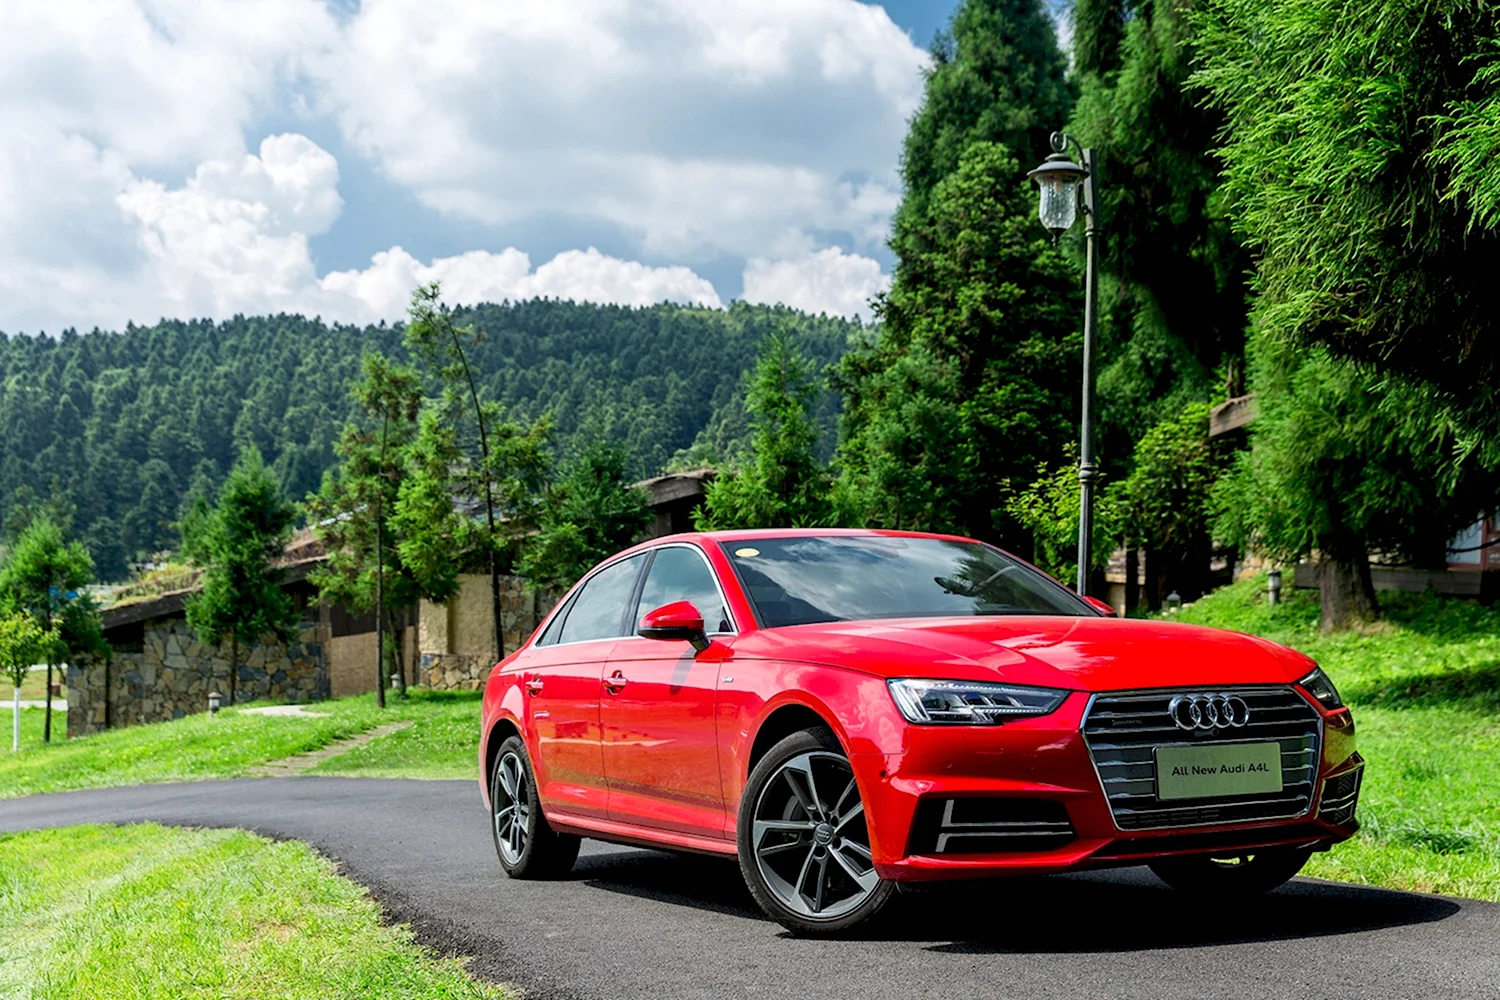 Audi Red a4 Touring